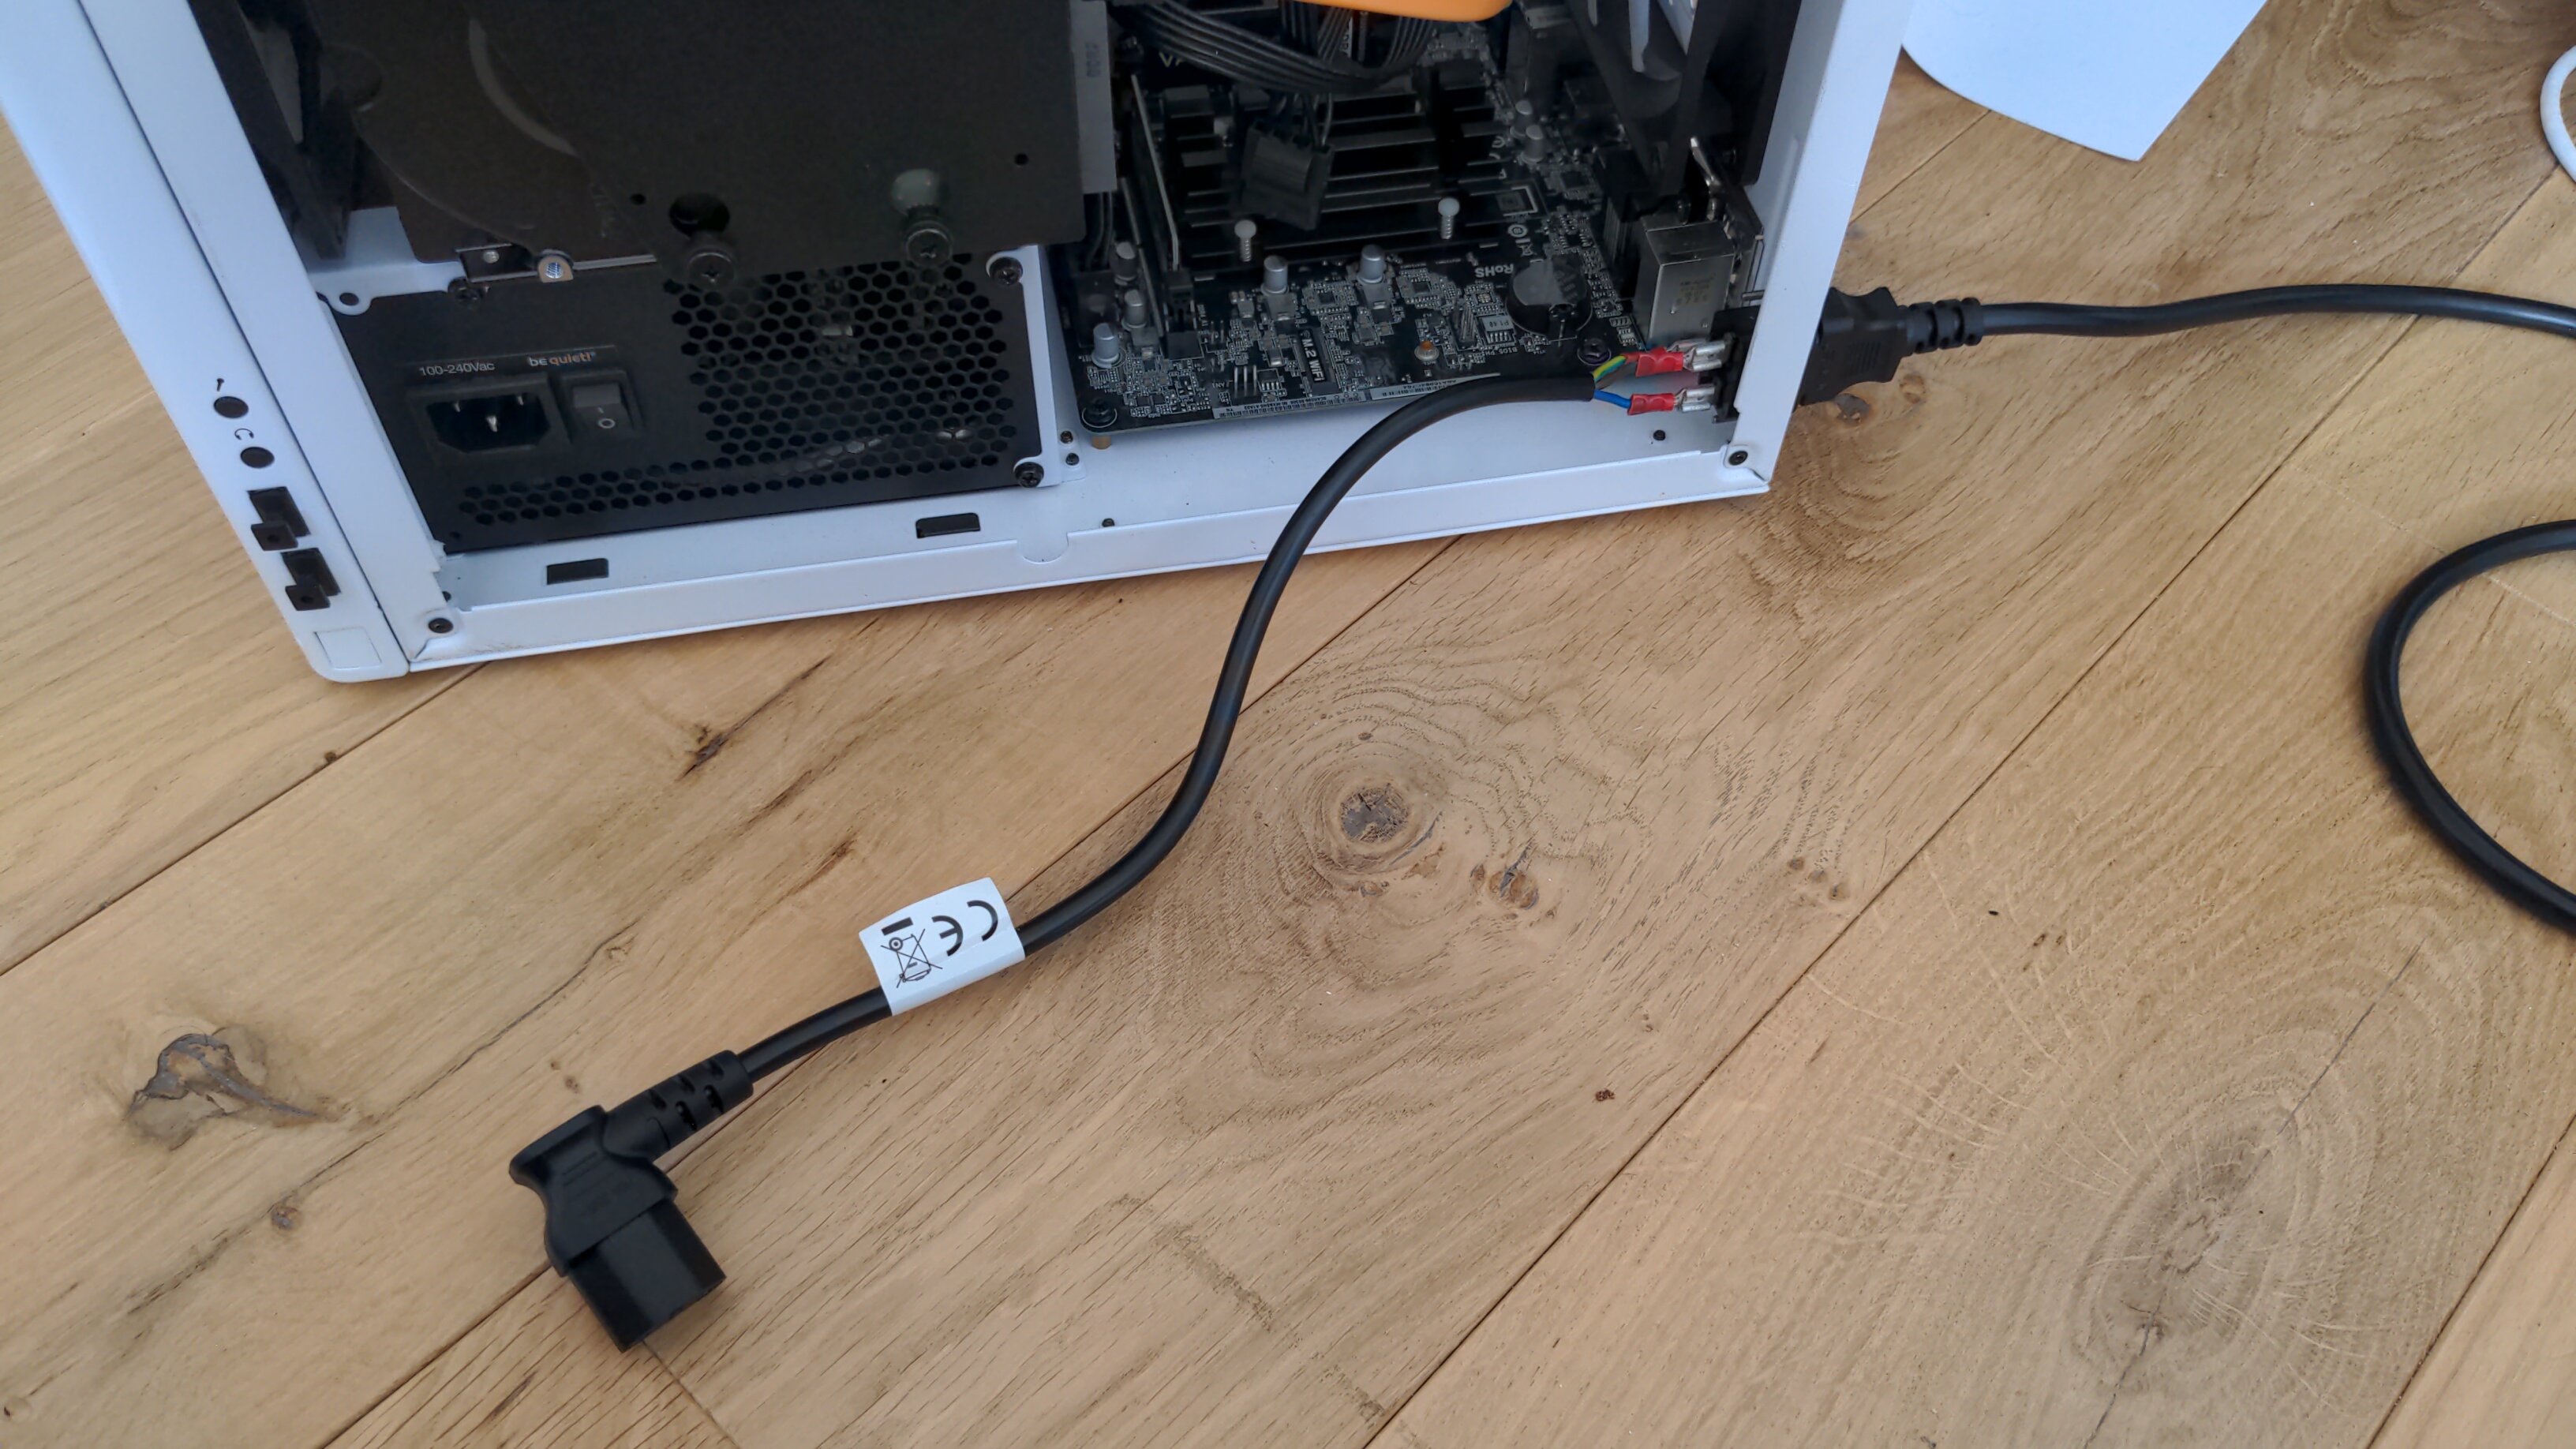 The cable is attached to the socket